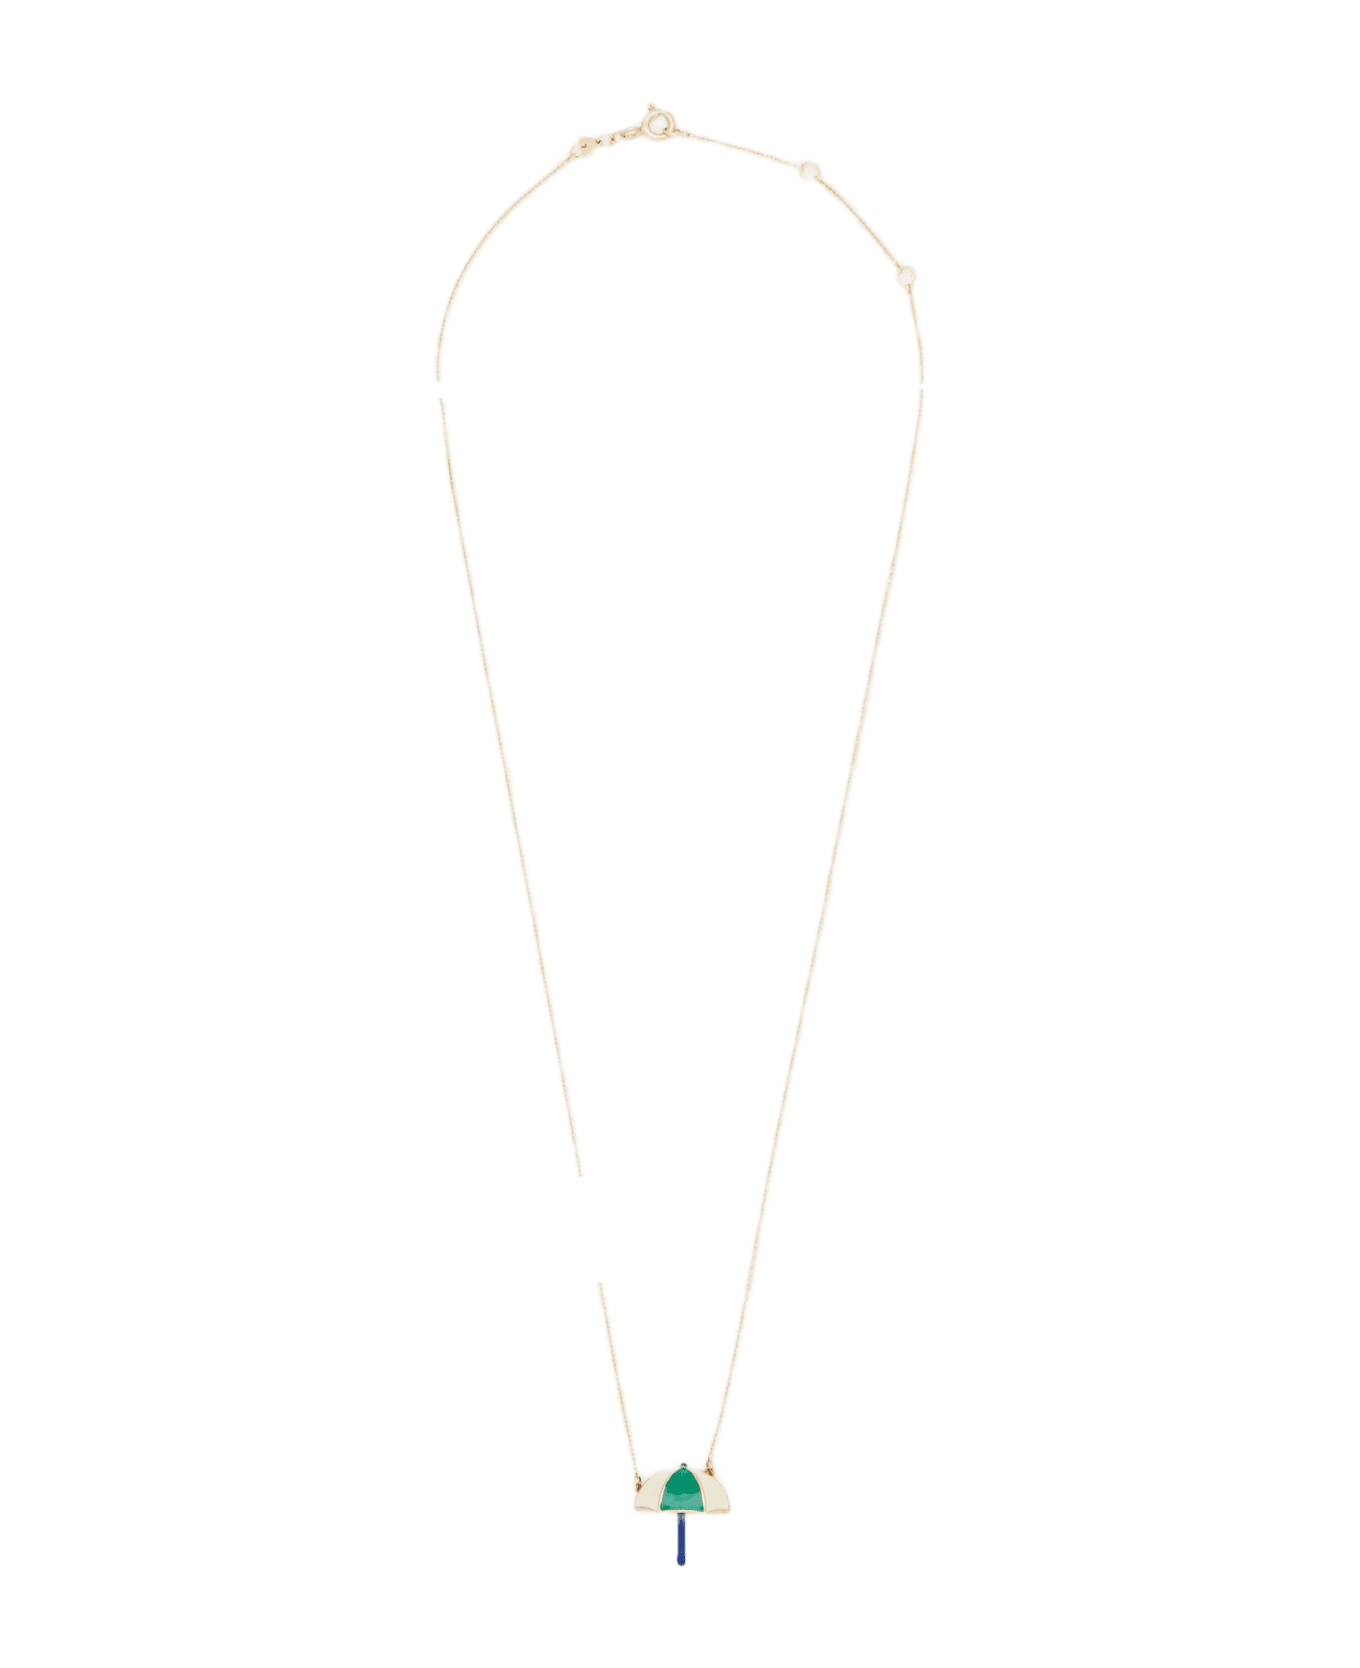 Aliita 9k Gold Sombrilla Polished Necklace - Green ネックレス